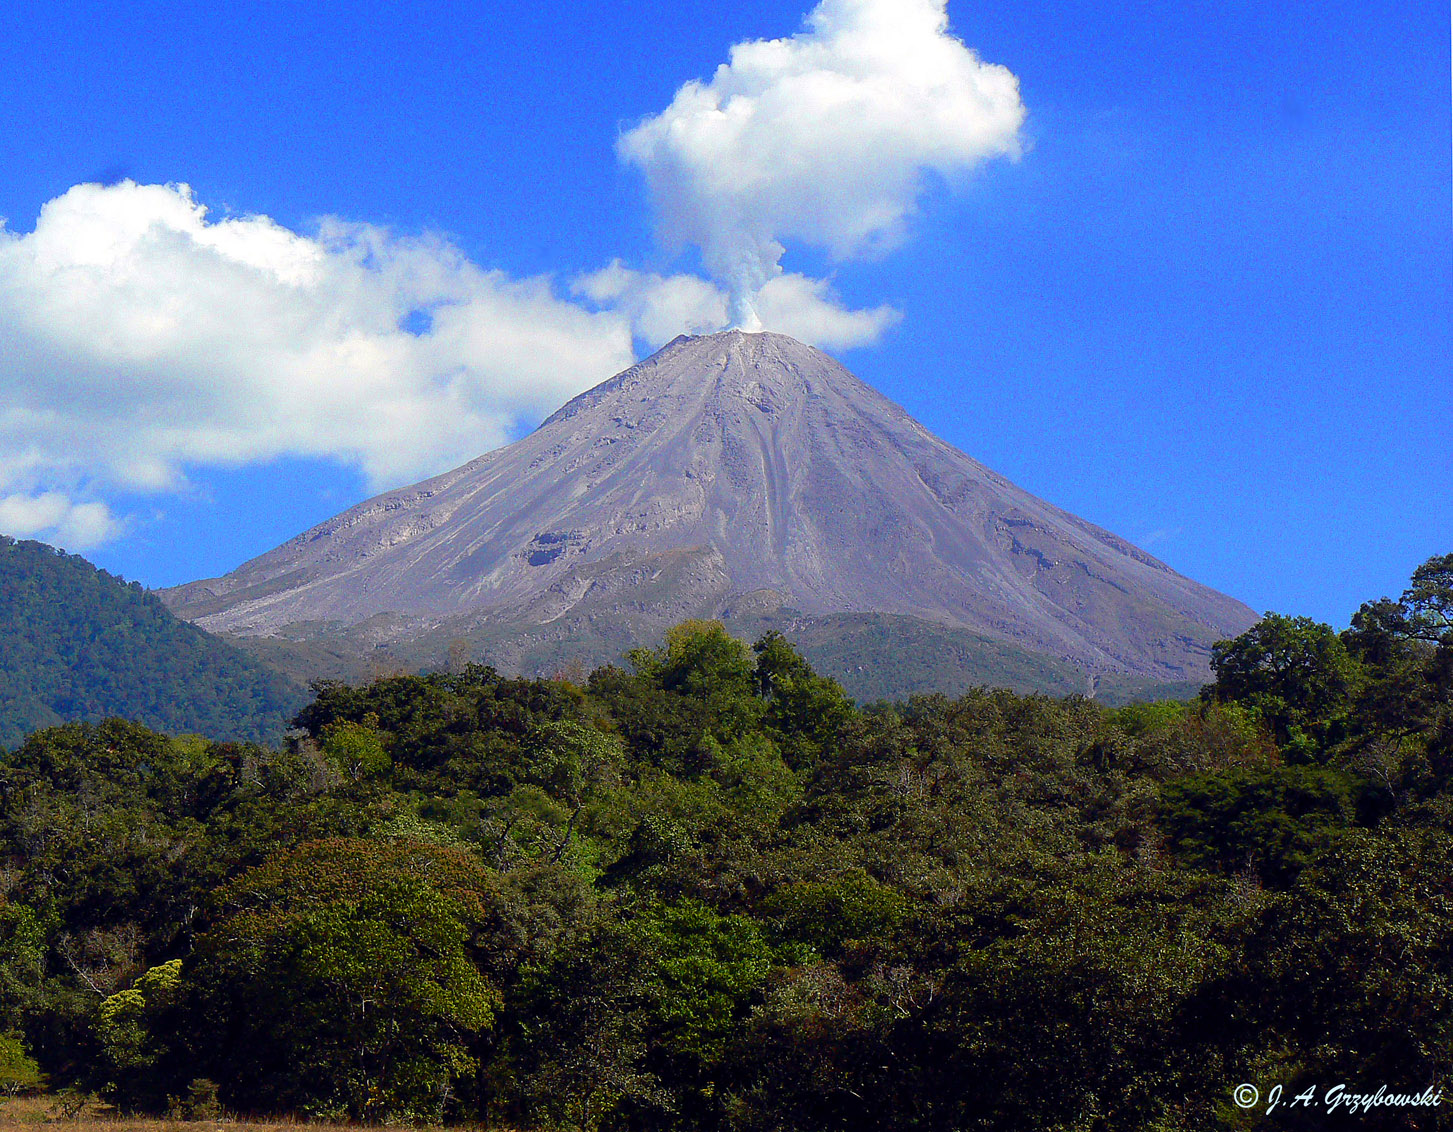 changing attitudes of the Volcan de Colima